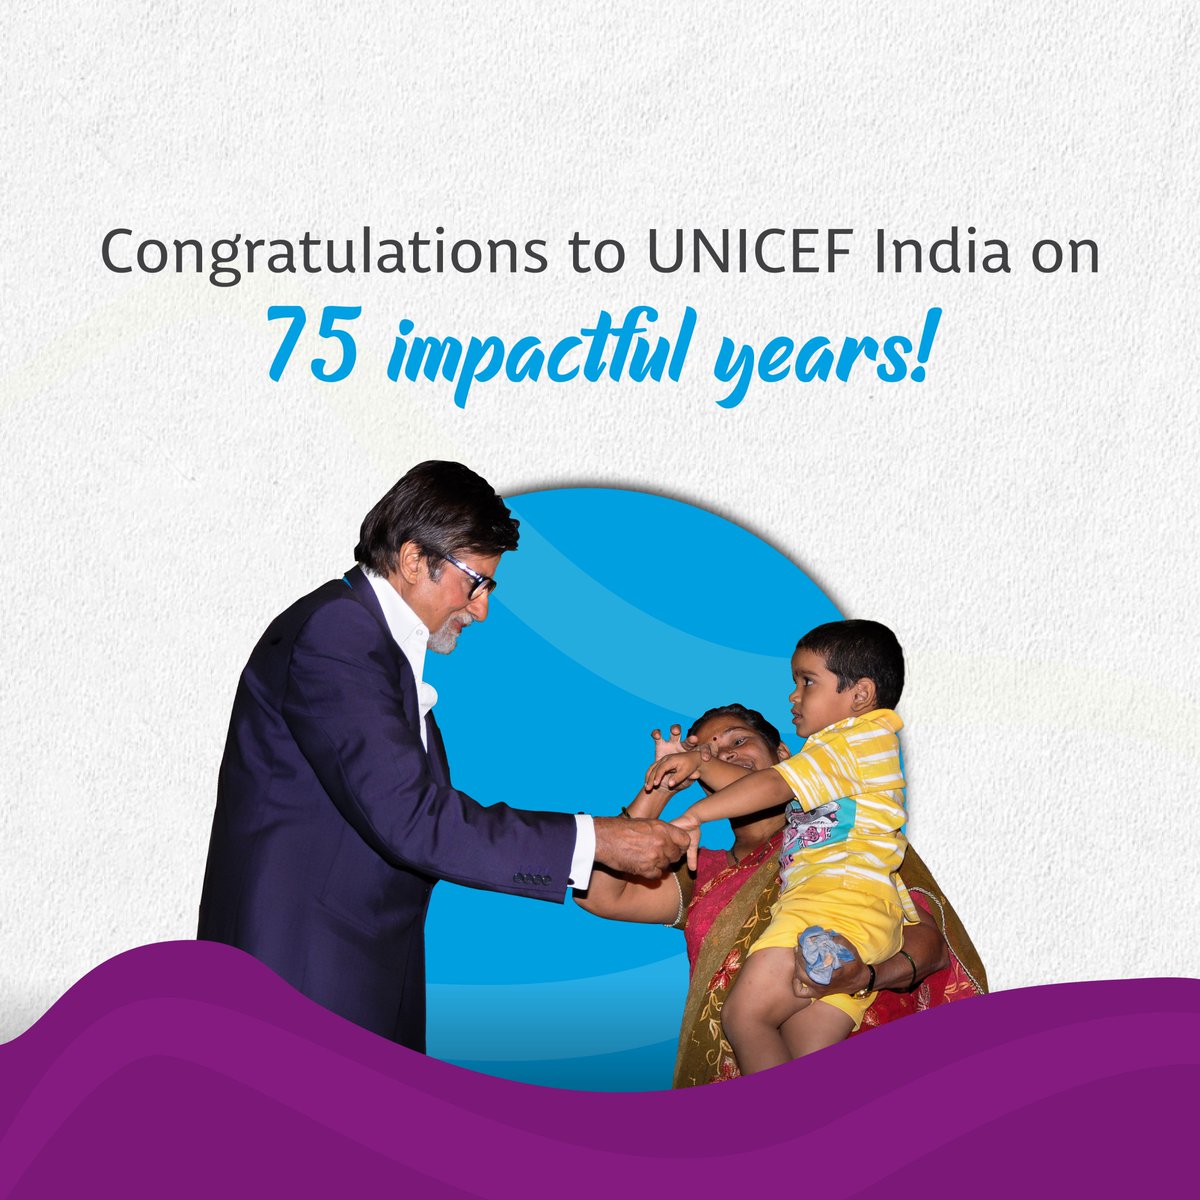 T 5007 - 75 years of #UNICEFwithIndia ! What a significant milestone for an organization that has meant so much to me .. I’m filled with pride knowing the success they have achieved along with the Goverment of India and its partners .. Together, we can and will achieve so much